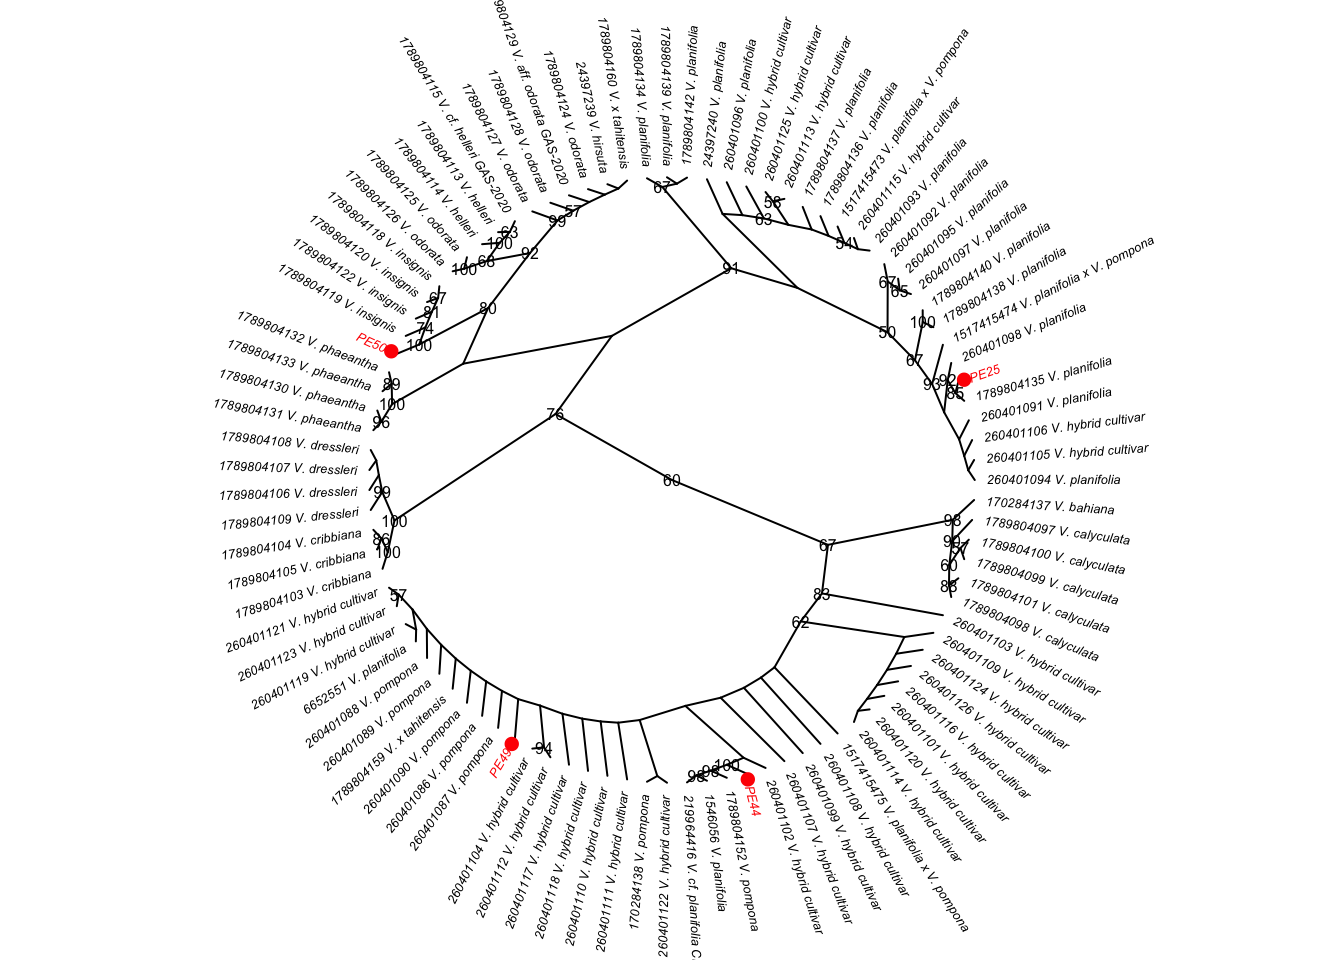 RAxML ITS phylogenetic tree with focus on clade containing all accessions of vanilla studied here.